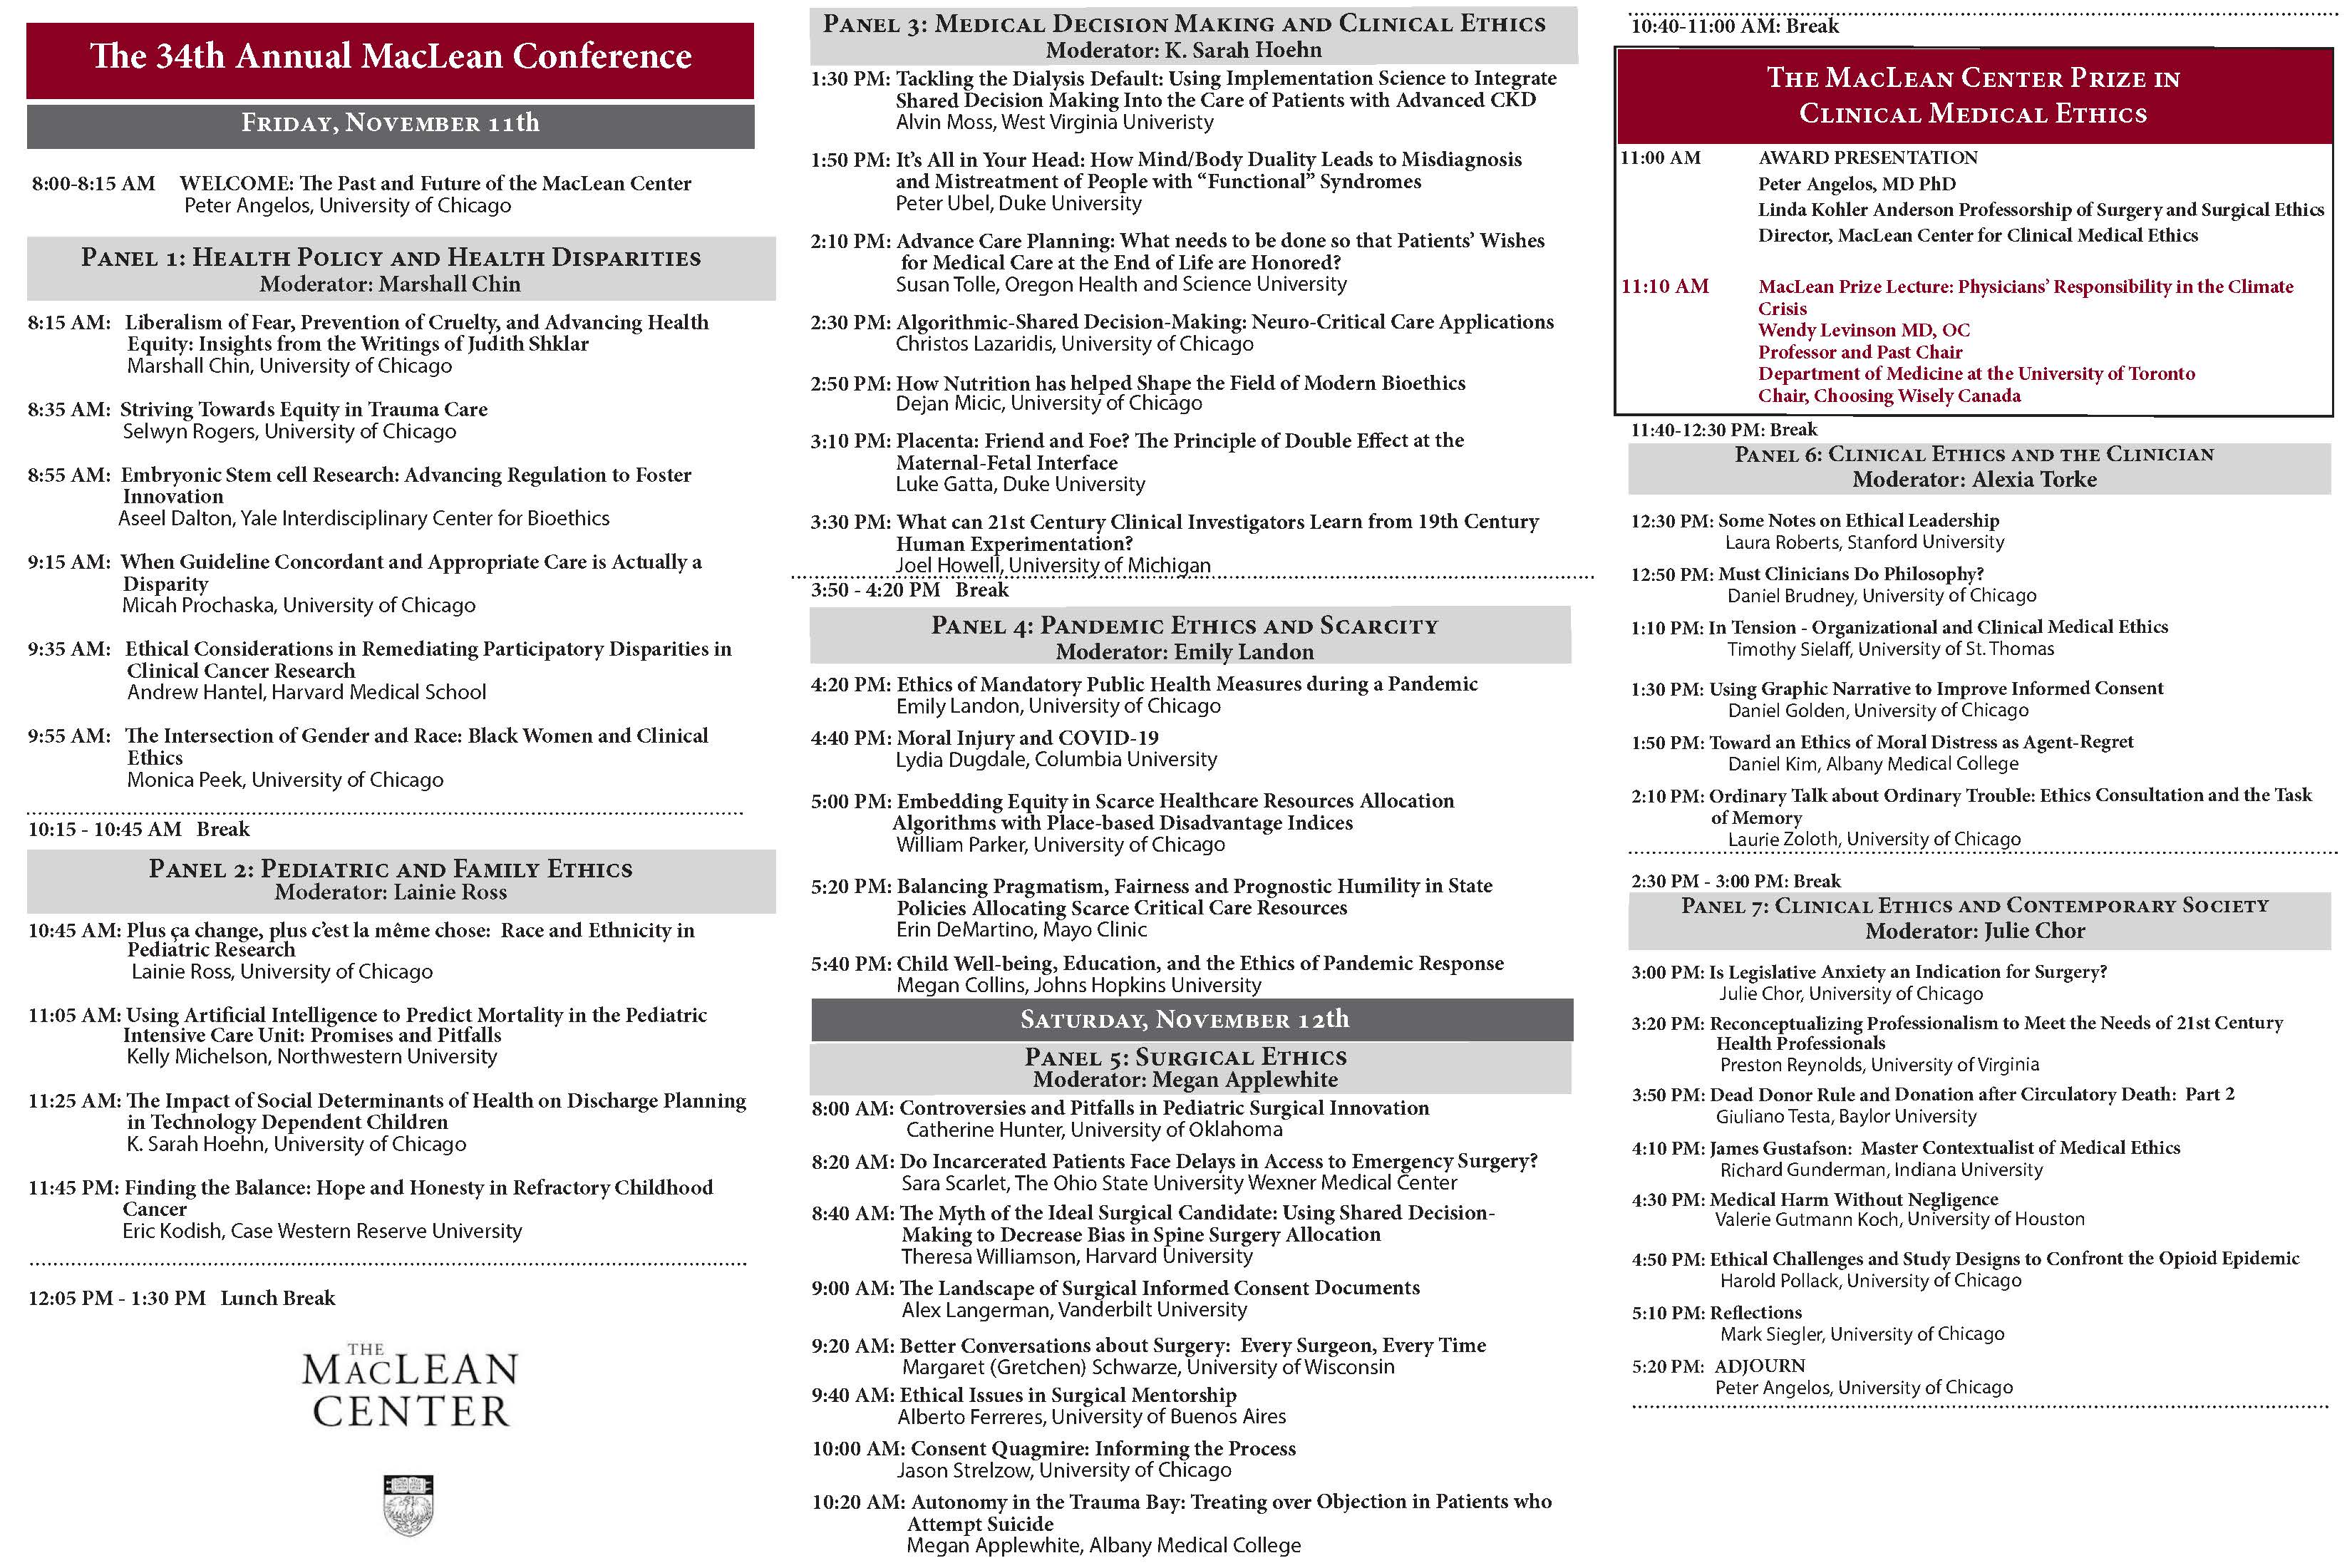 34th Annual MacLean Center Conference Schedule